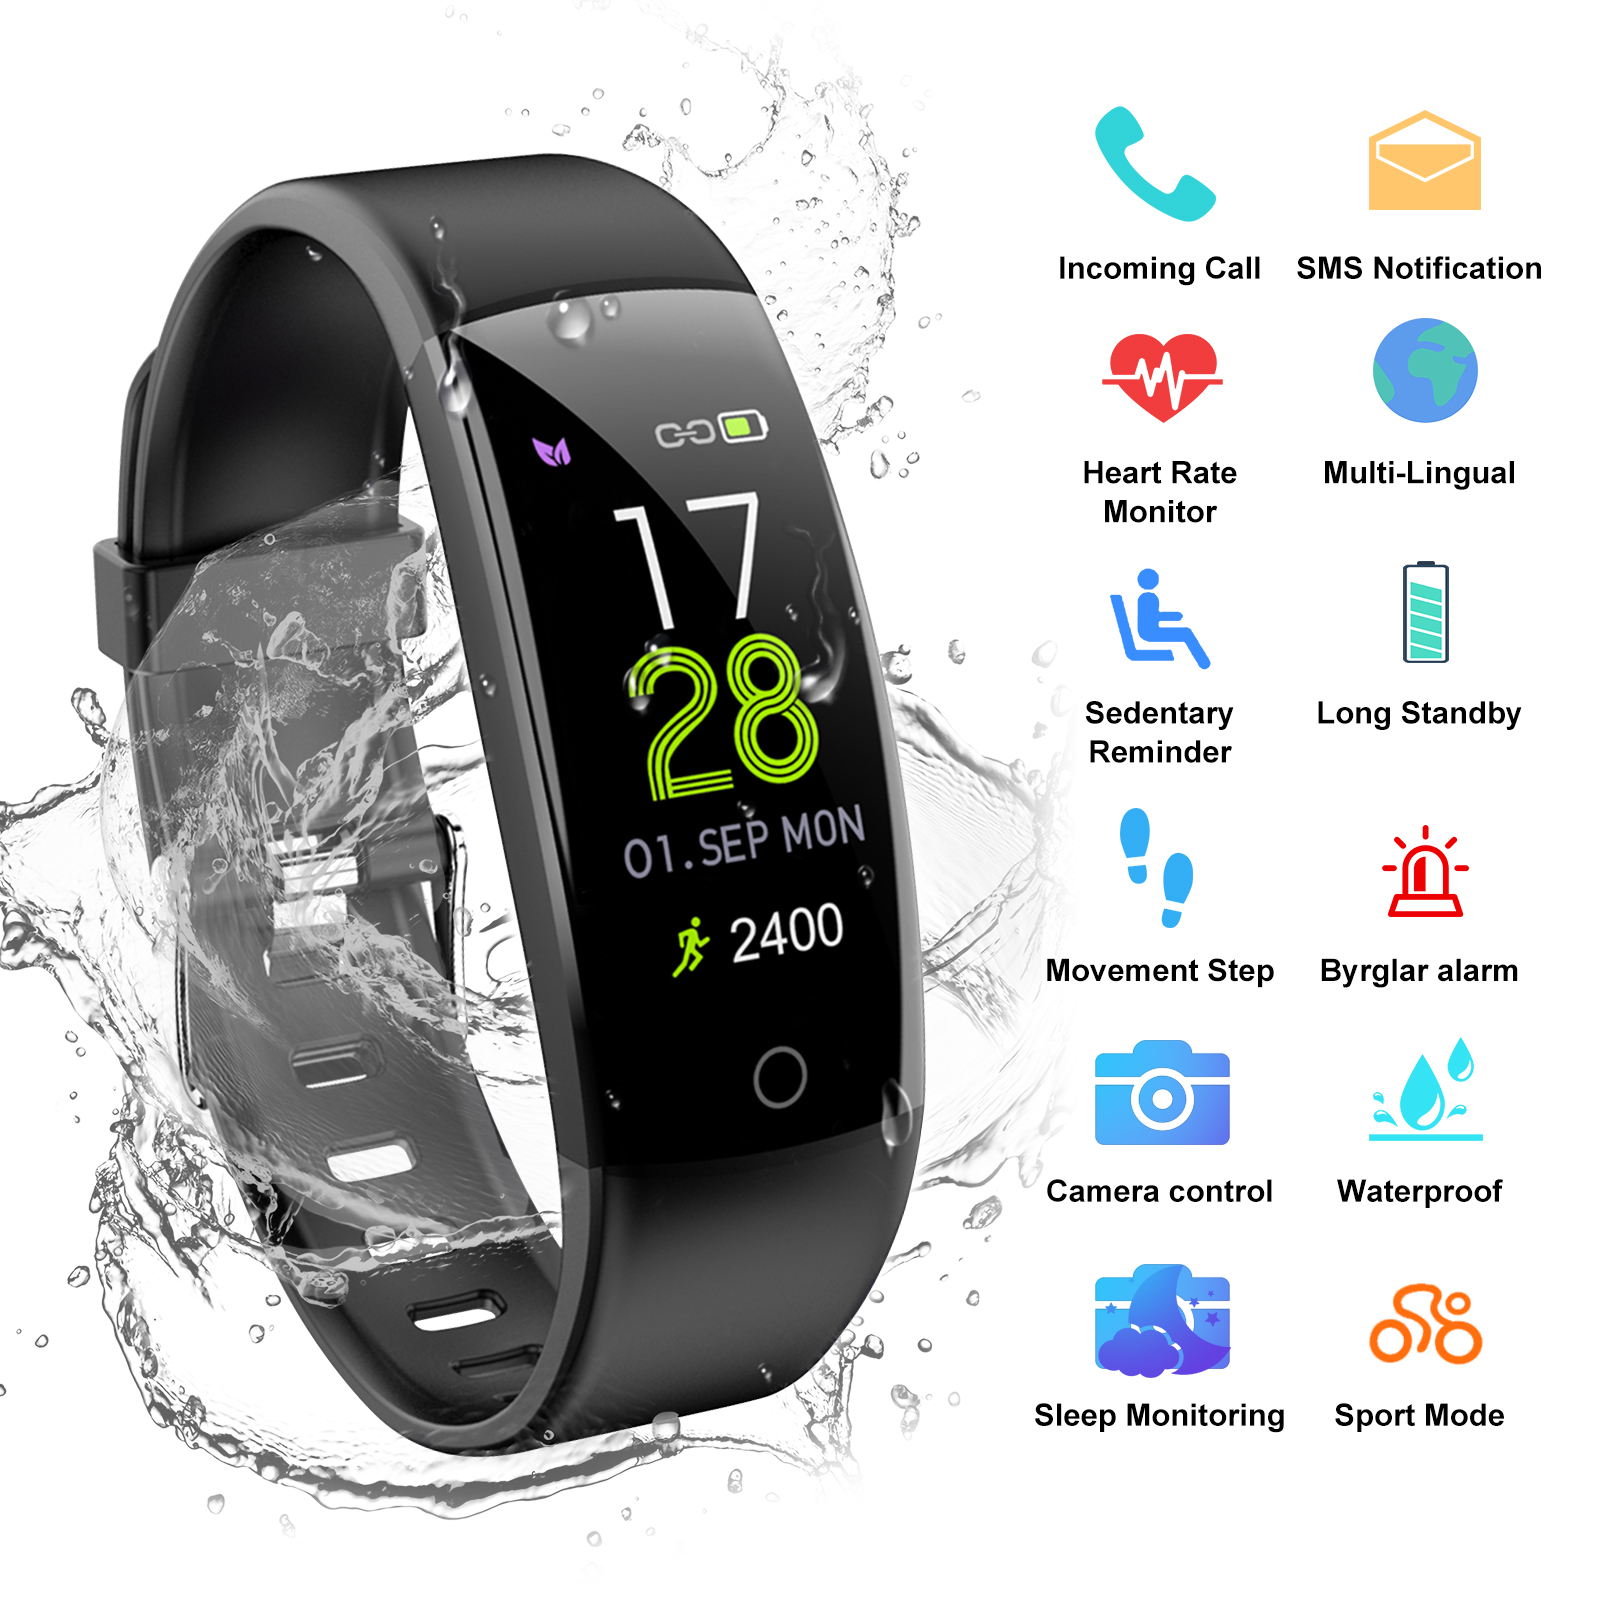 AGPTEK Waterproof Fitness Tracker with Heart Rate Monitor, Activity Monitor Smart Wristband for IOS Android Smartphone - image 1 of 8